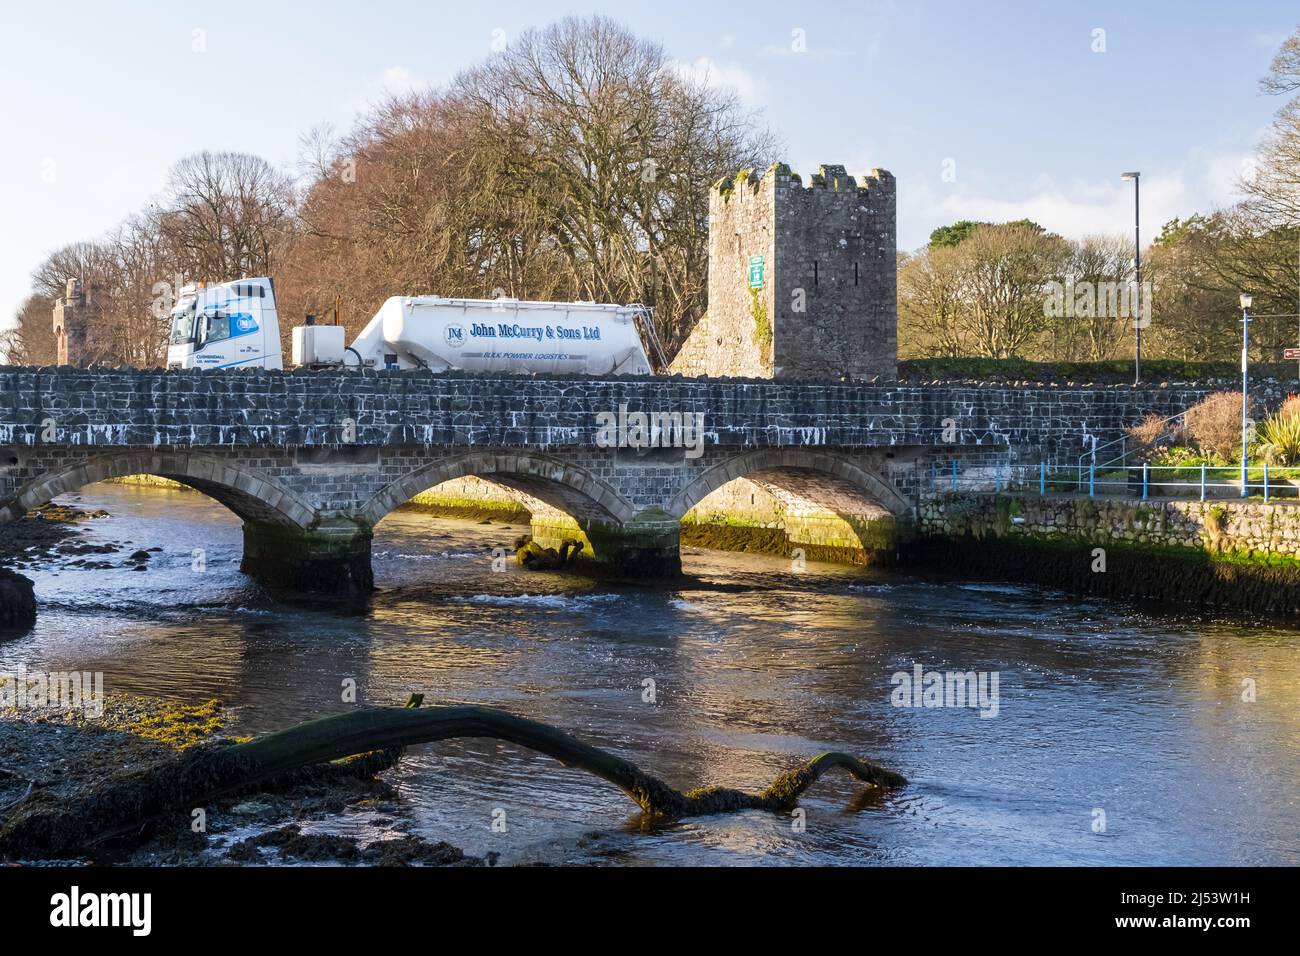 White lorry of John McCurry and Sons Ltd passing over the river at the historic village of Glenarm in County Antrim, Northern Ireland. Stock Photo